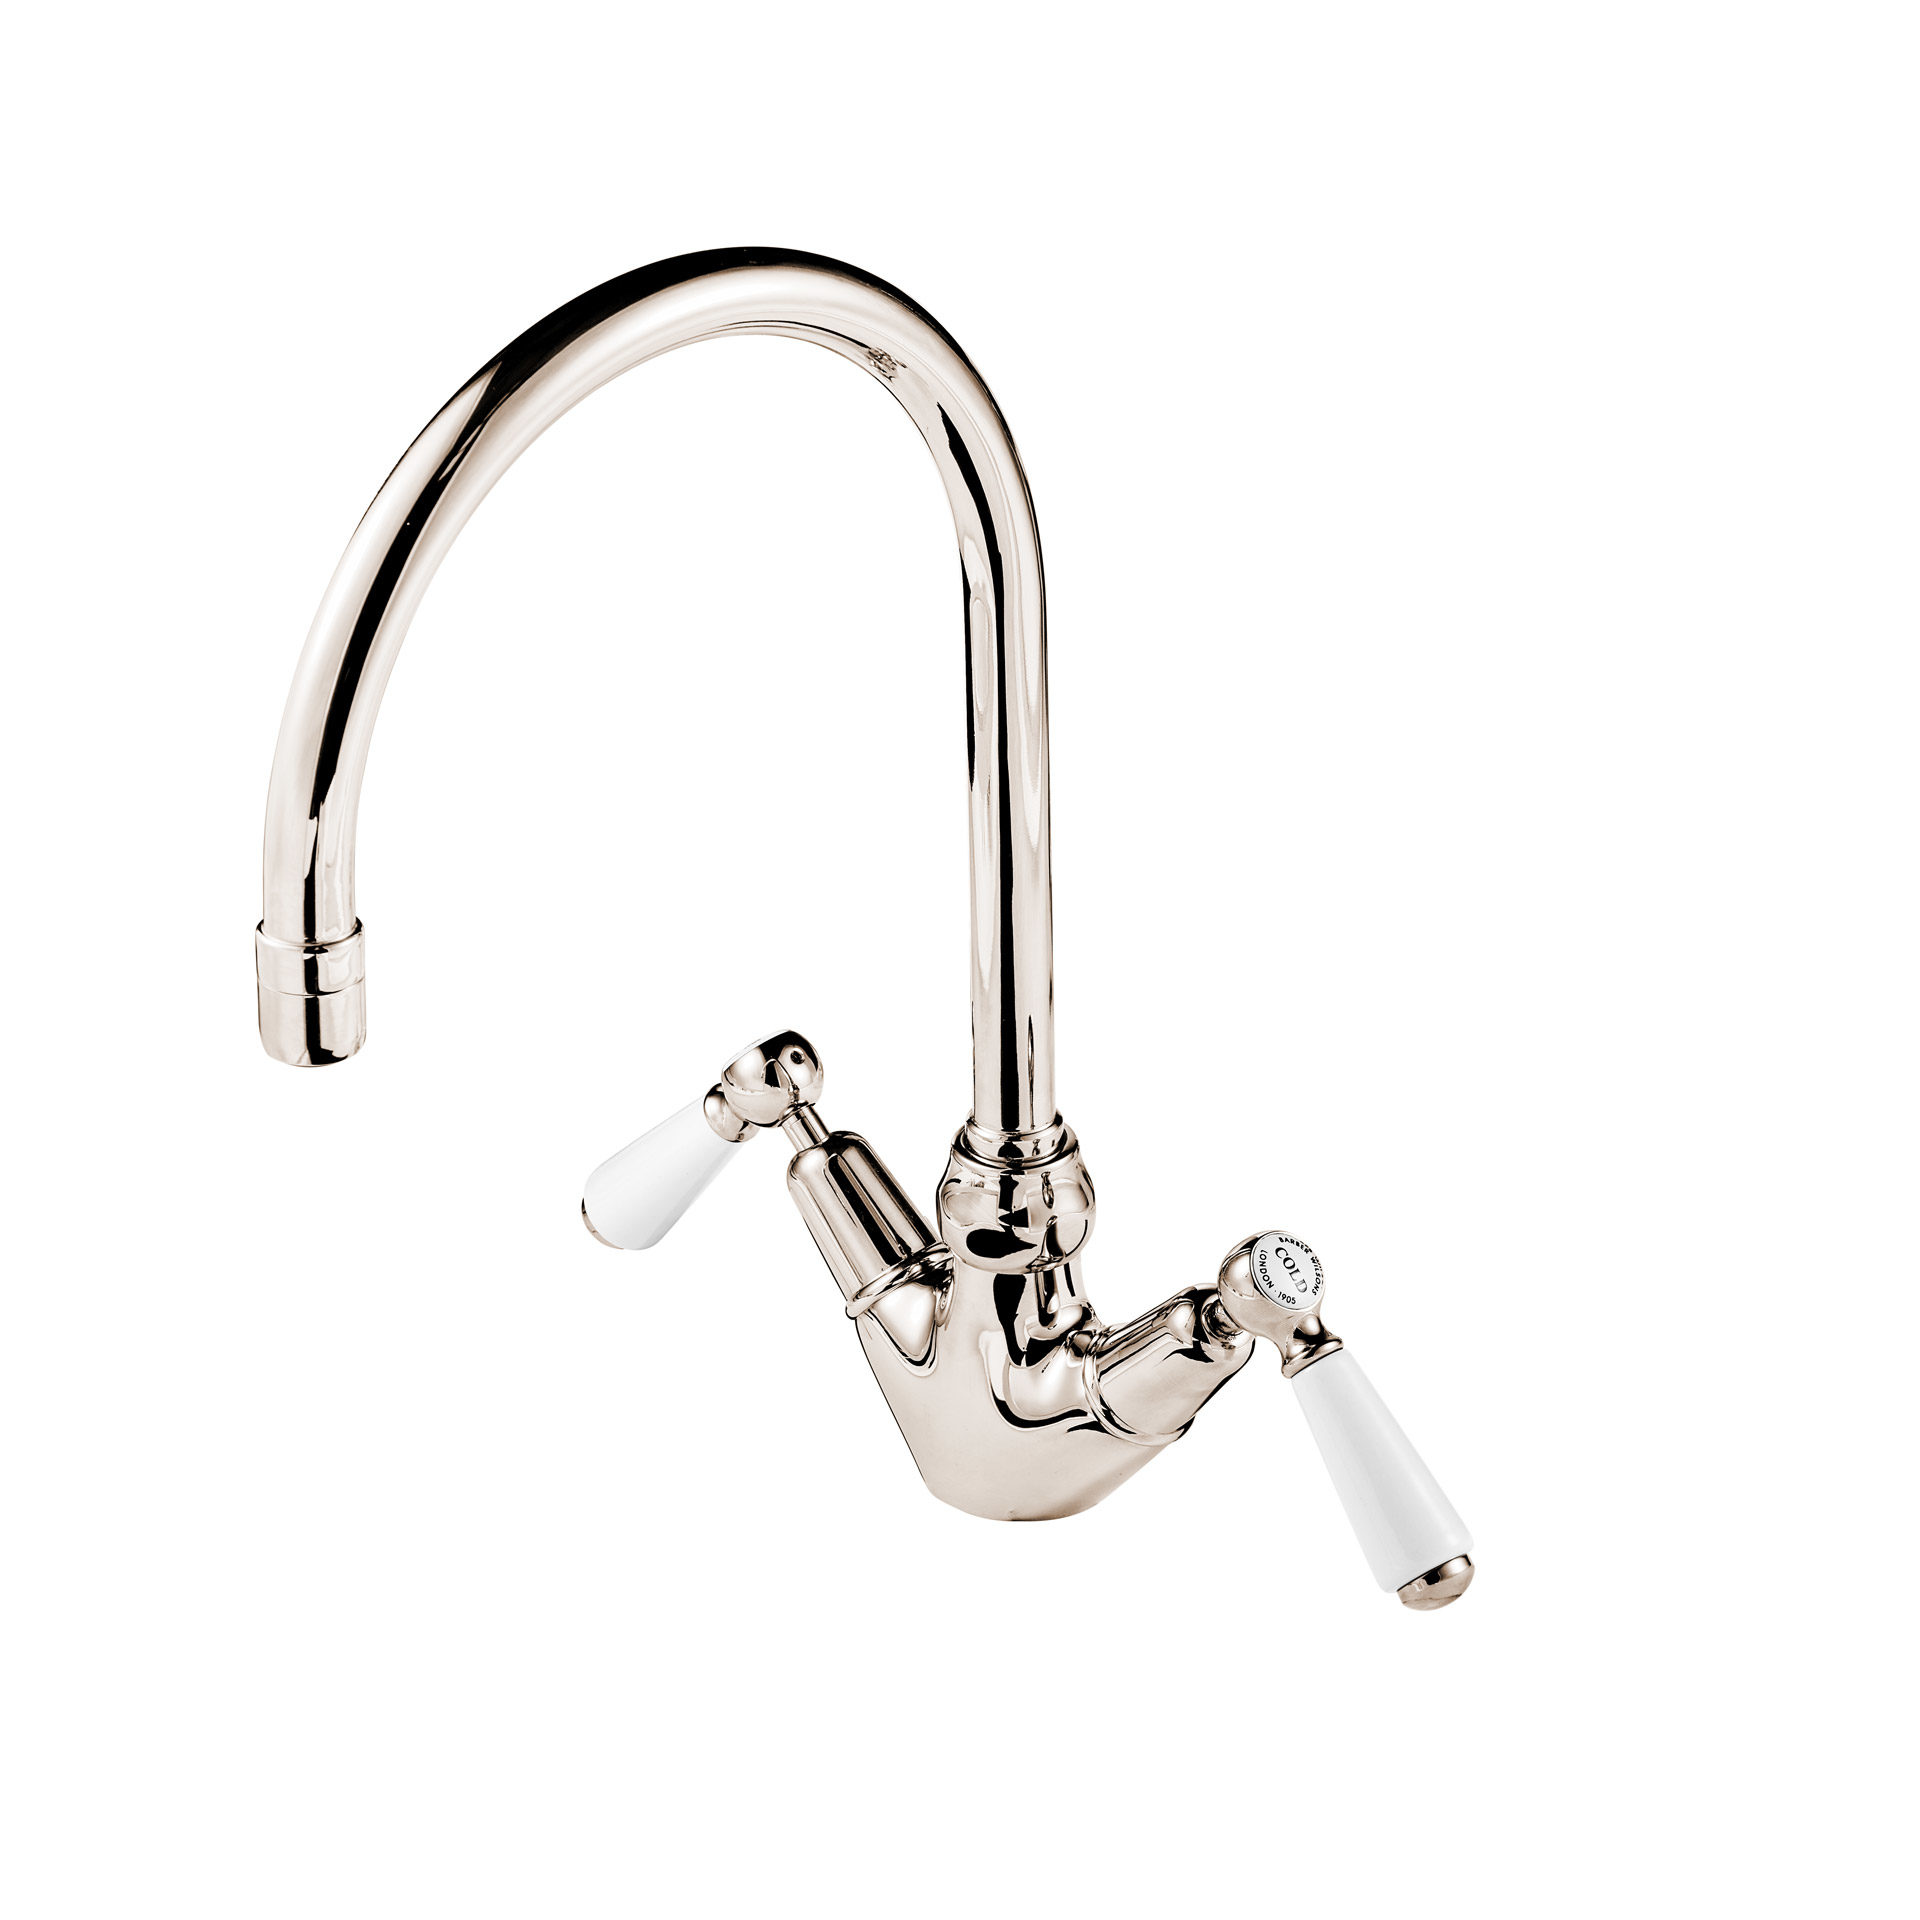 Deck mounted kitchen taps mixer with single hole